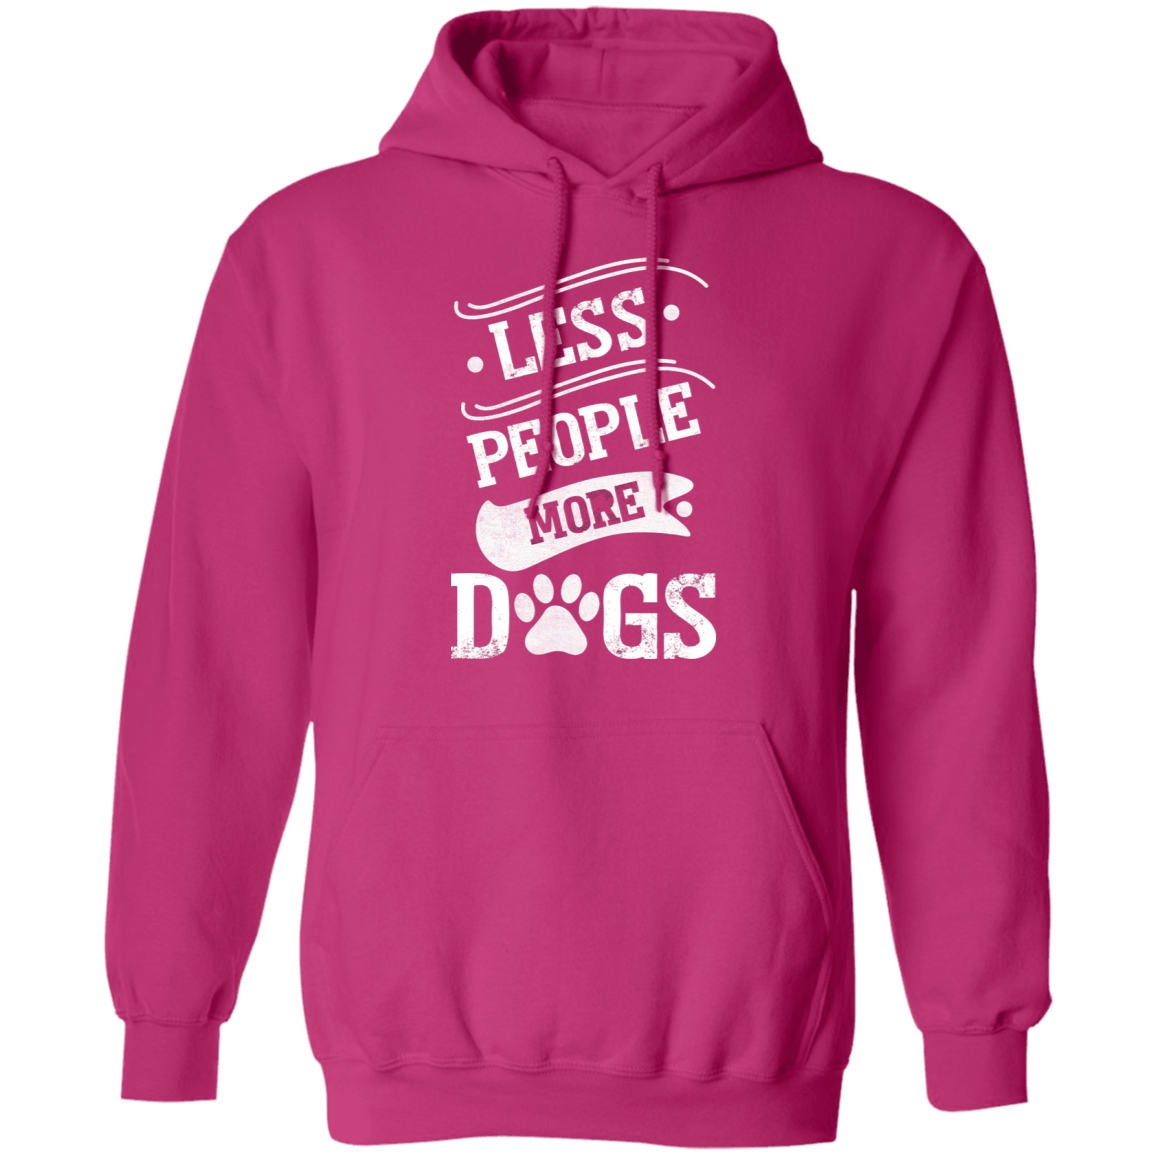 Less People More Dogs - Hoodie.